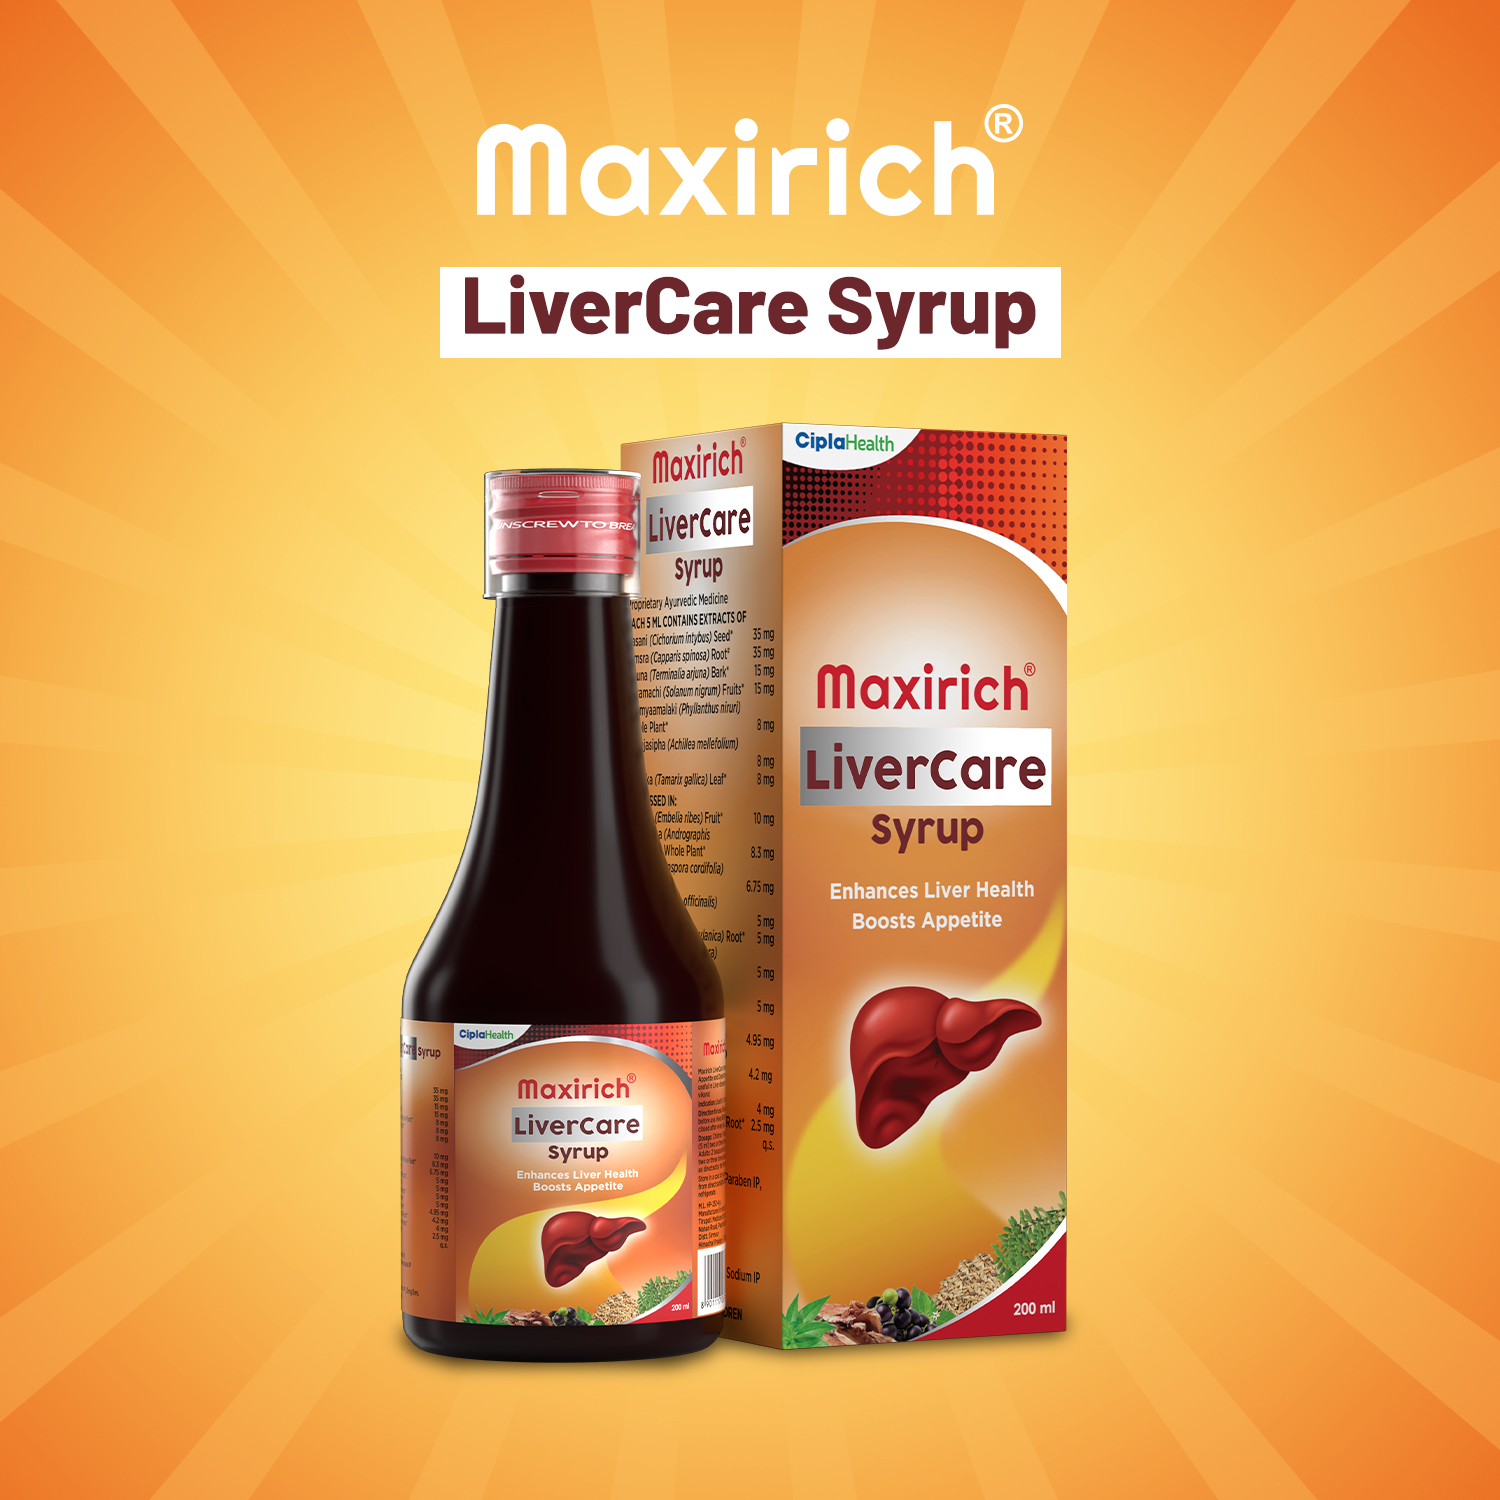 Maxirich Liver Care Helps Out Toxins & Prevents Oxidative Stress